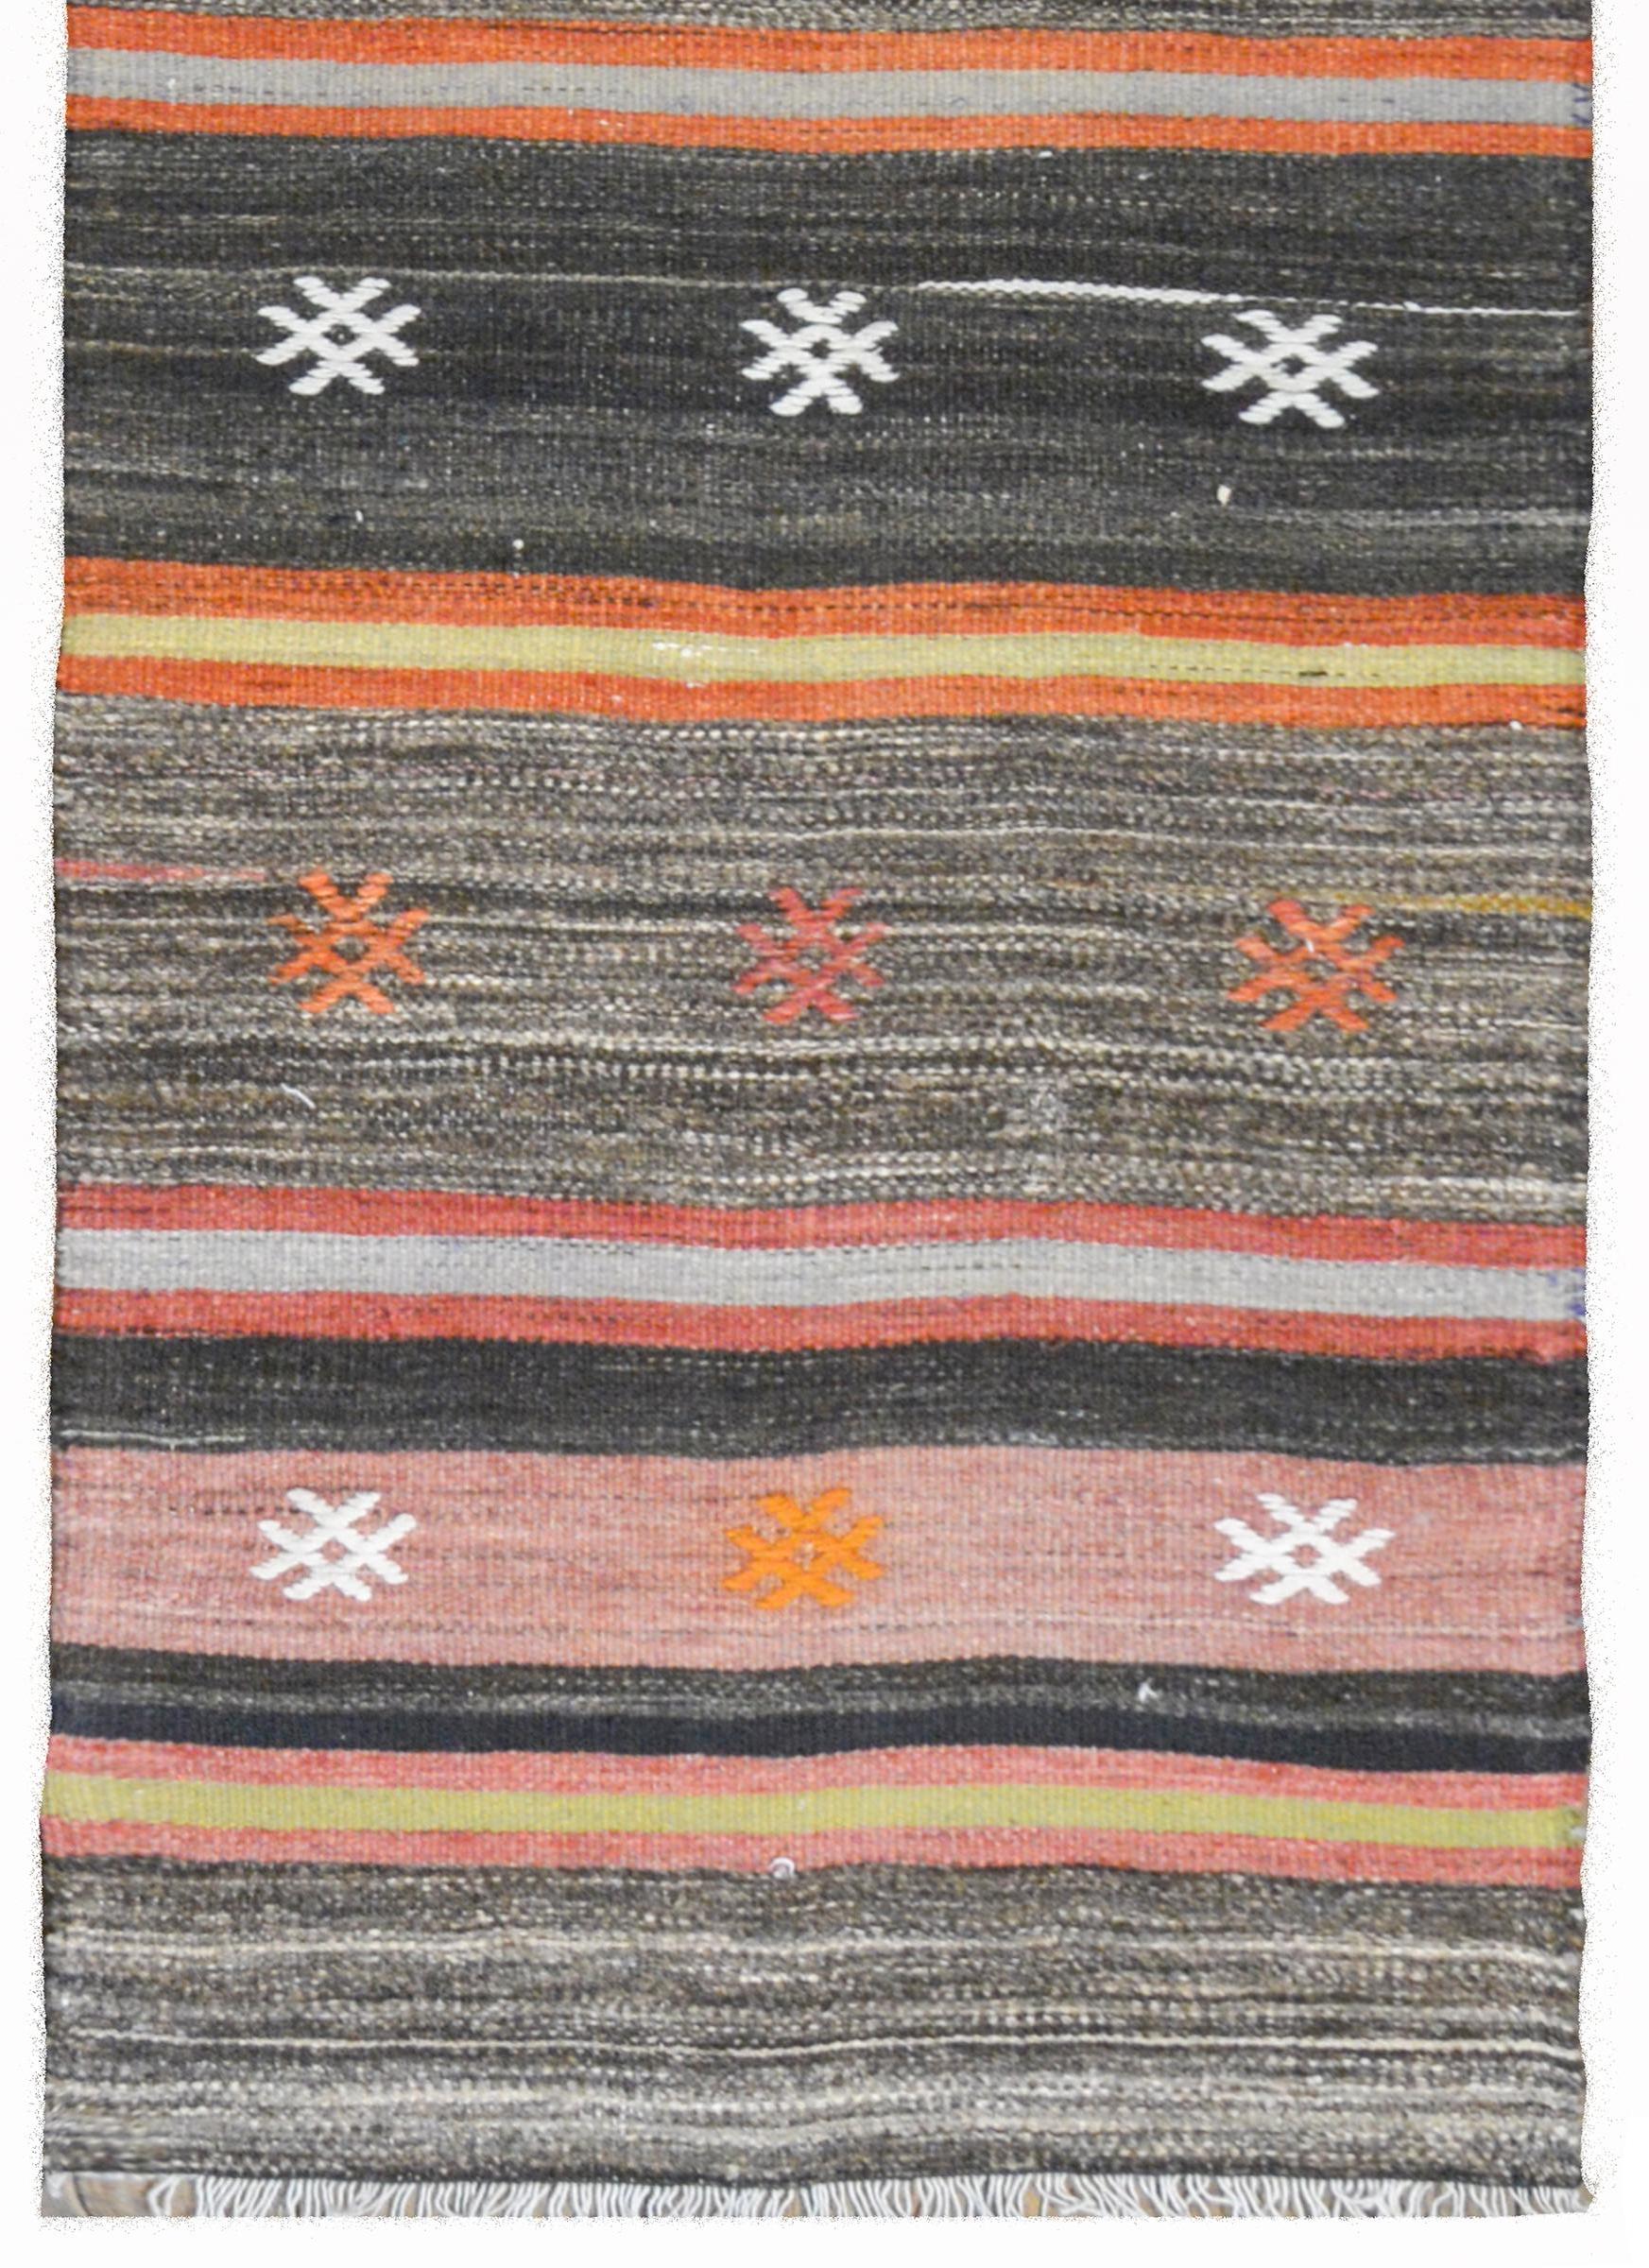 A beautiful vintage Anatolian Turkish Kilim runner with a crimson, gold, brown, and white, and crimson striped pattern with embroidered stylized flowers.